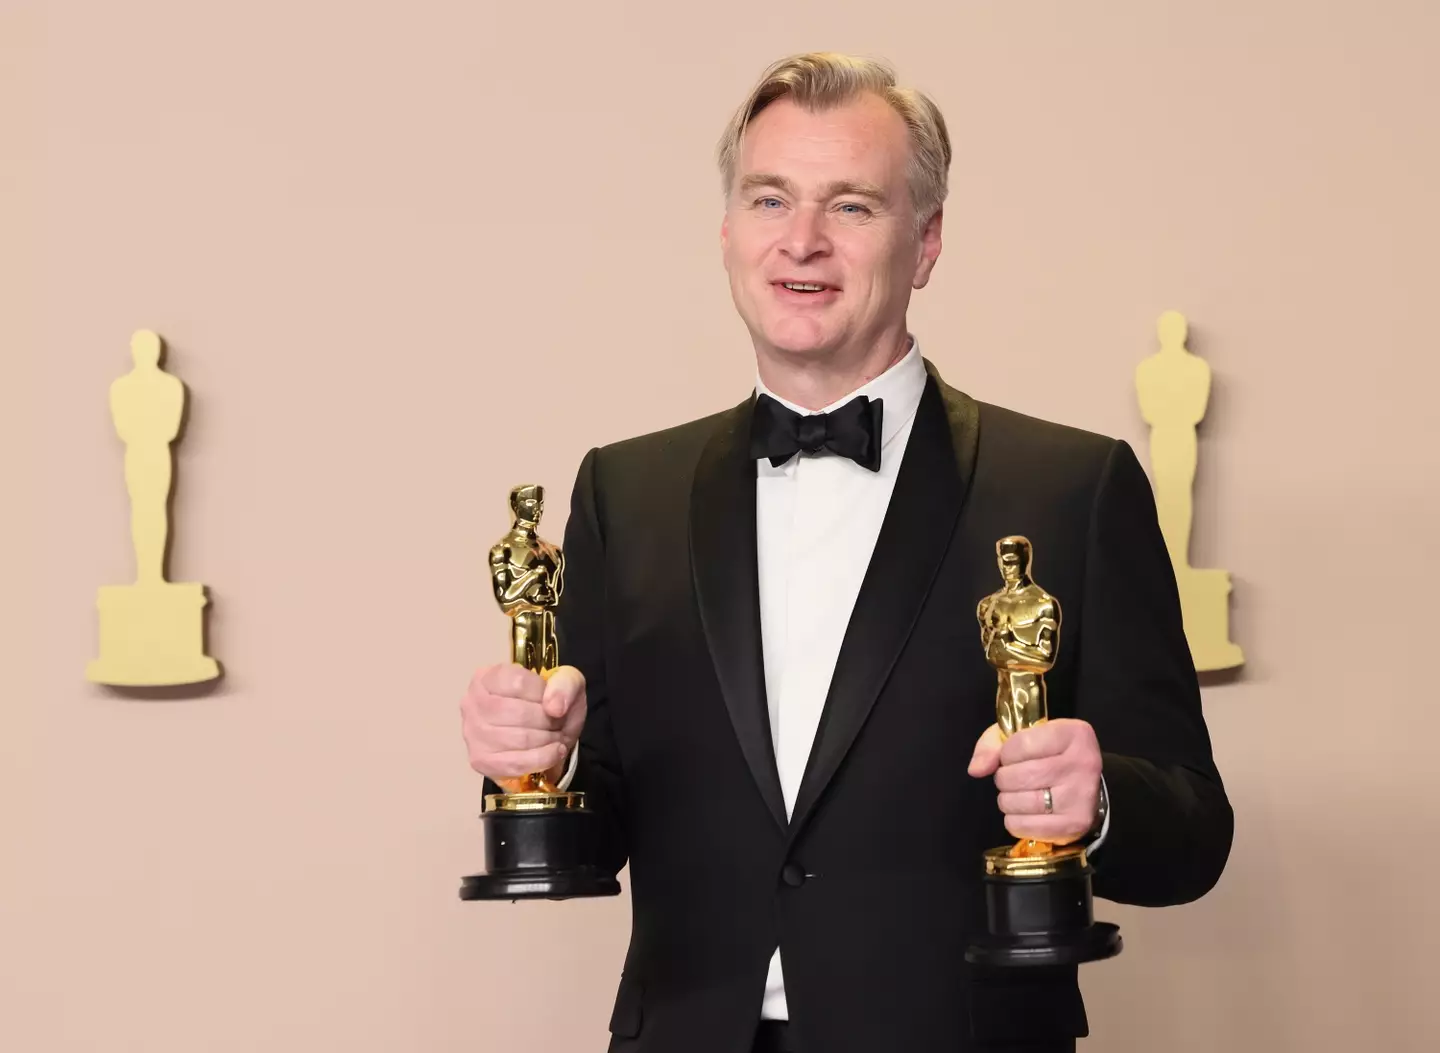 Christopher Nolan bagged two awards at this year's Oscars.